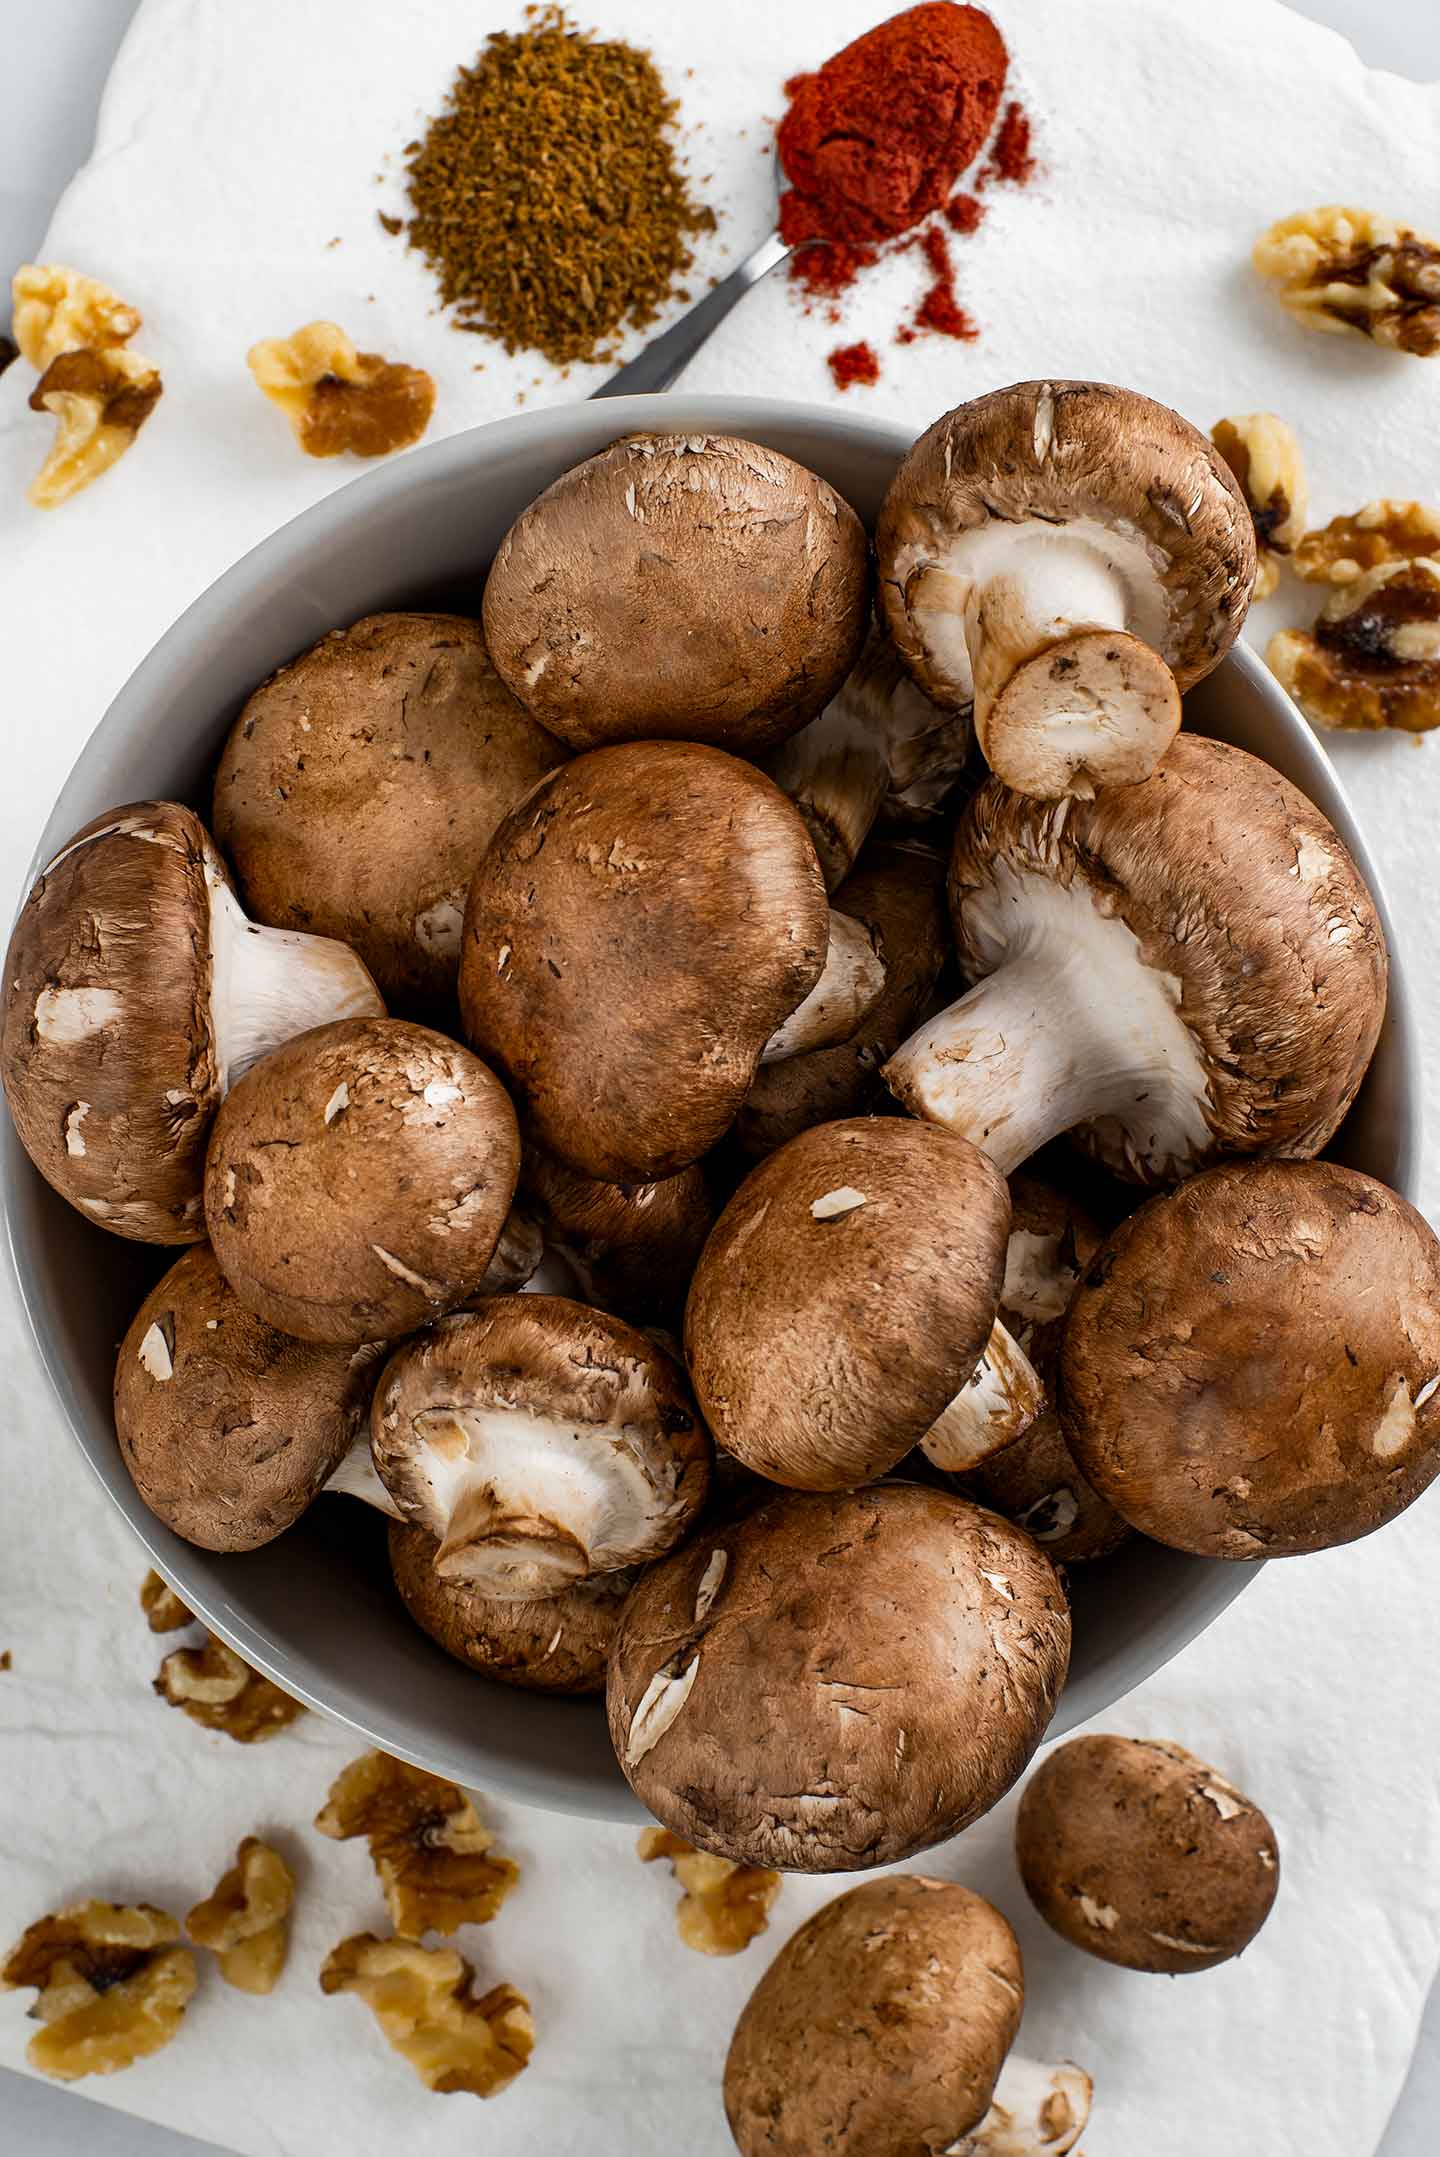 Top down view of cremini mushrooms overflowing a bowl with walnuts, cumin, and paprika on a white tray below.